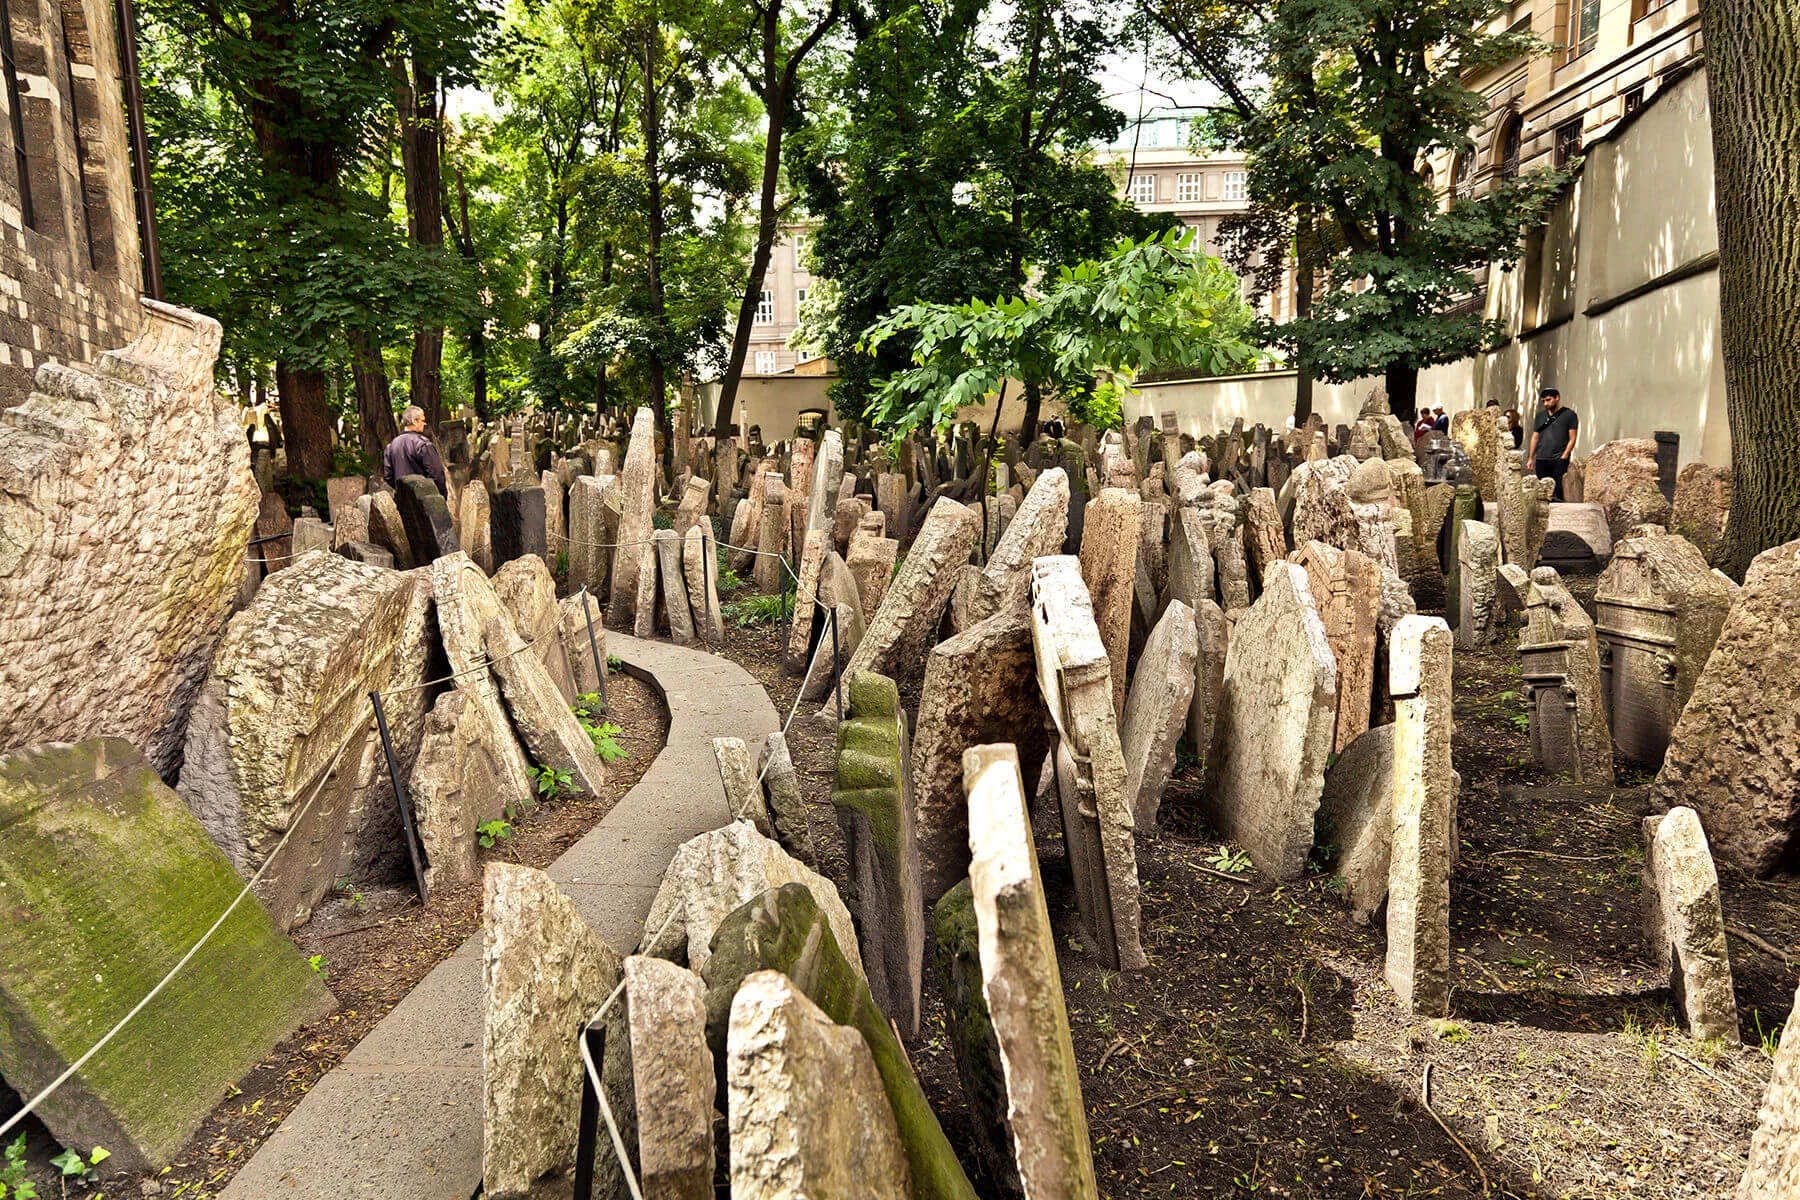 The eroded tombstones of Prague’s Jewish cemetery are evocative witnesses of the past